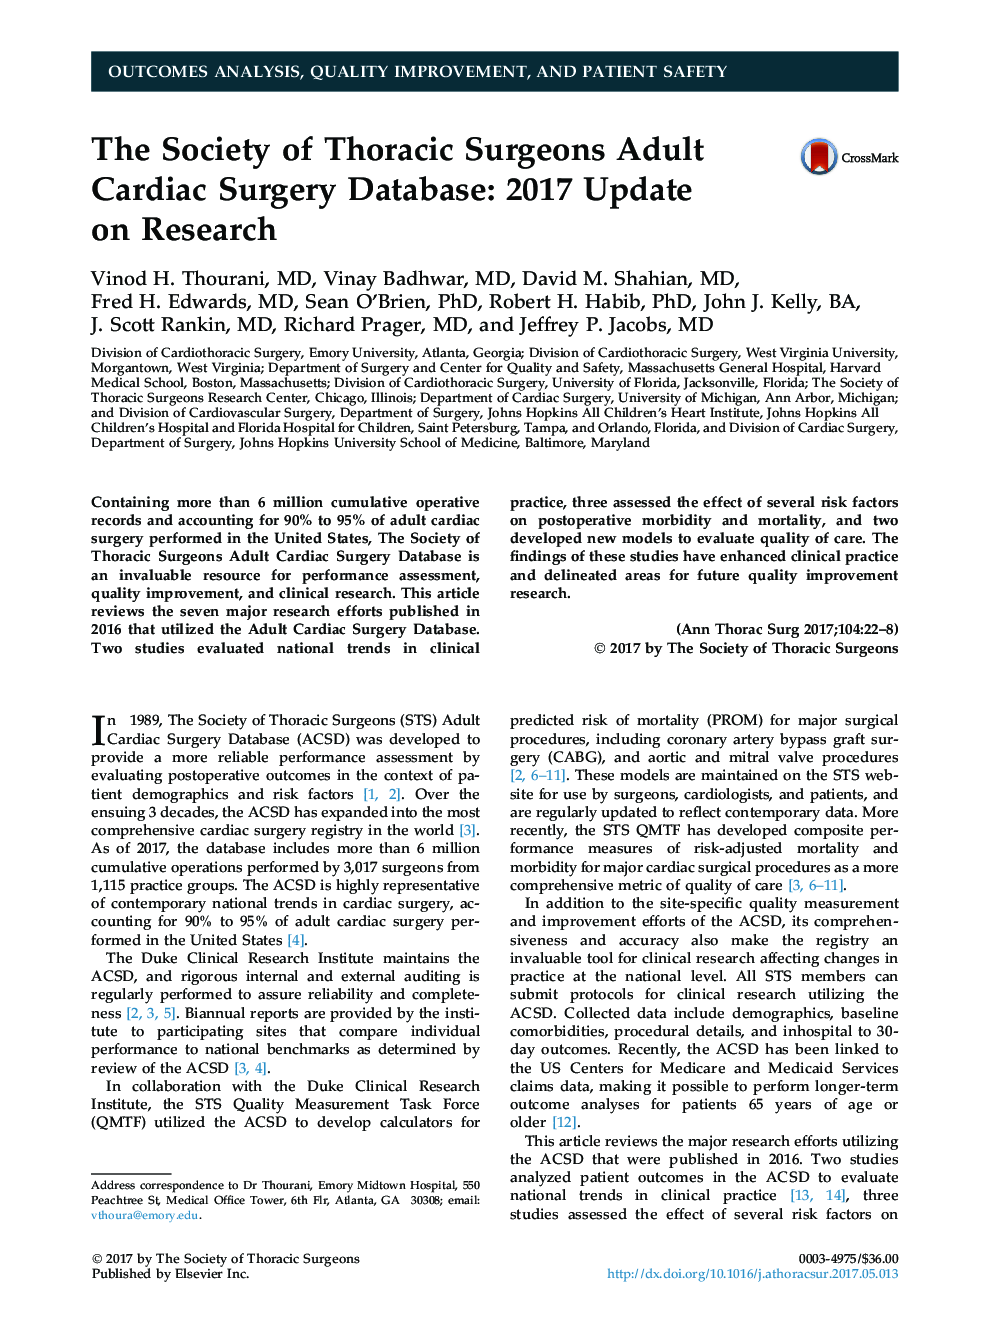 The Society of Thoracic Surgeons Adult Cardiac Surgery Database: 2017 Update onÂ Research